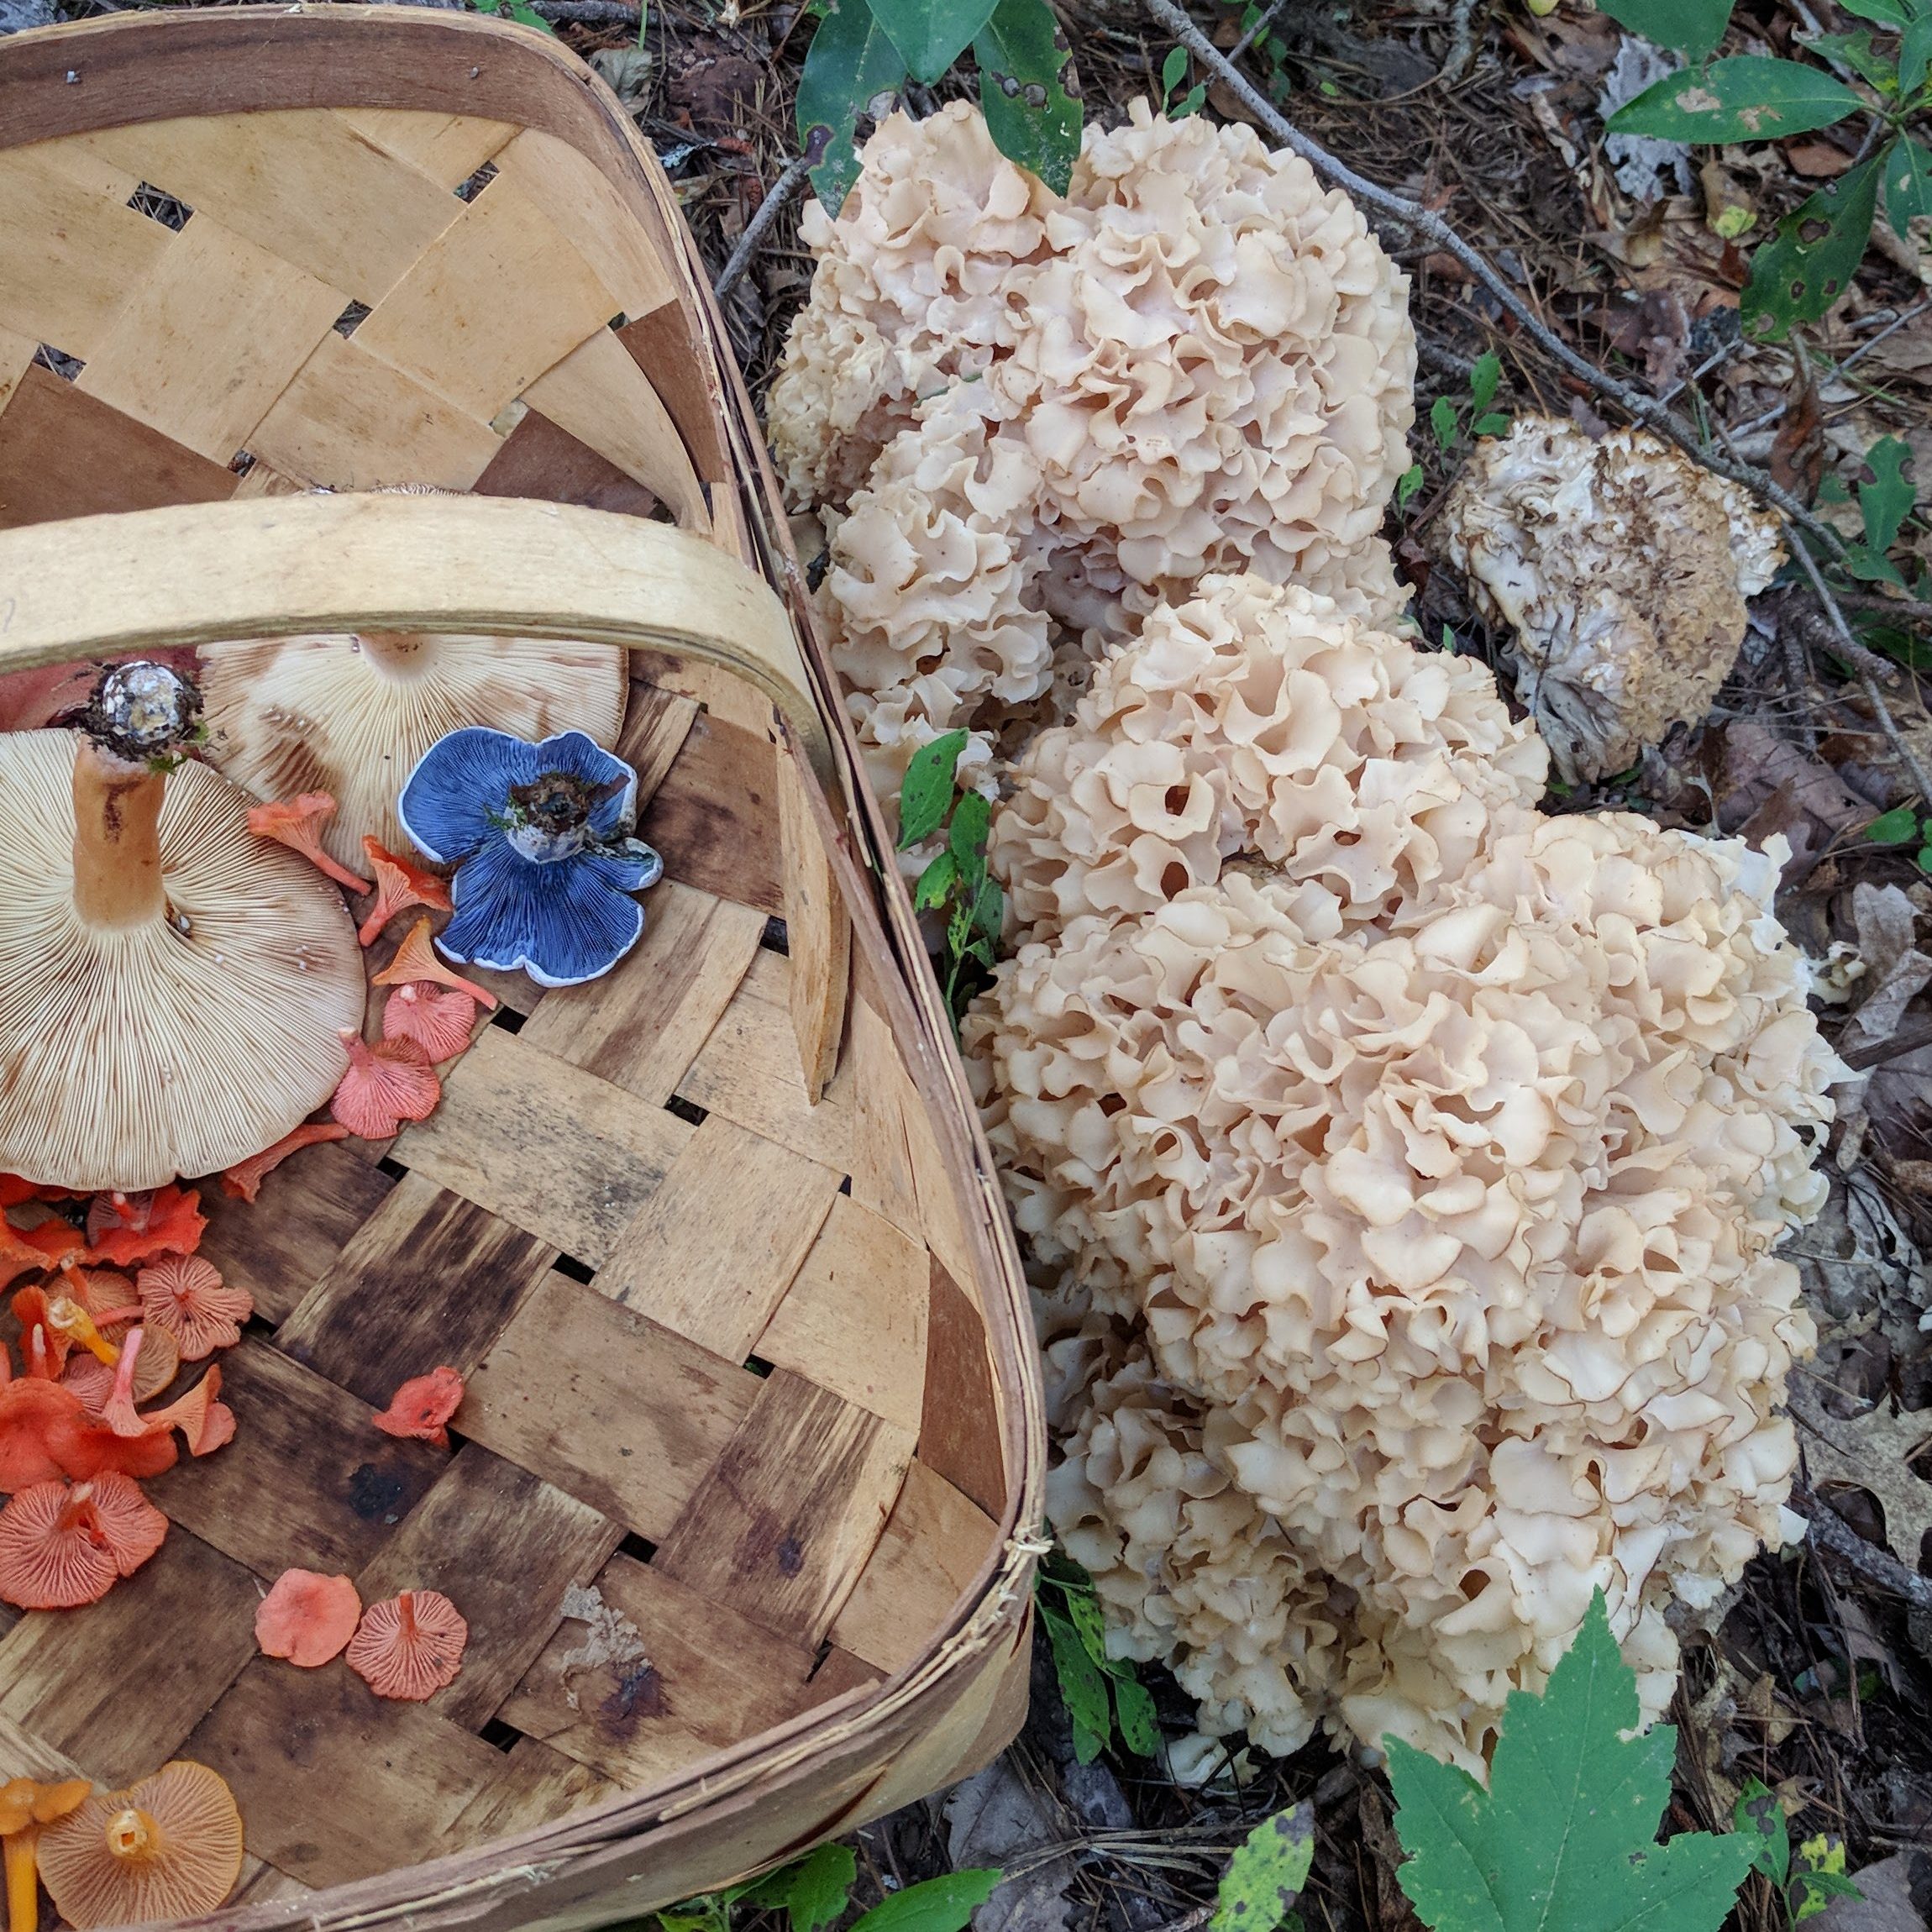 a collecting basket next to a large cauliflower mushroom